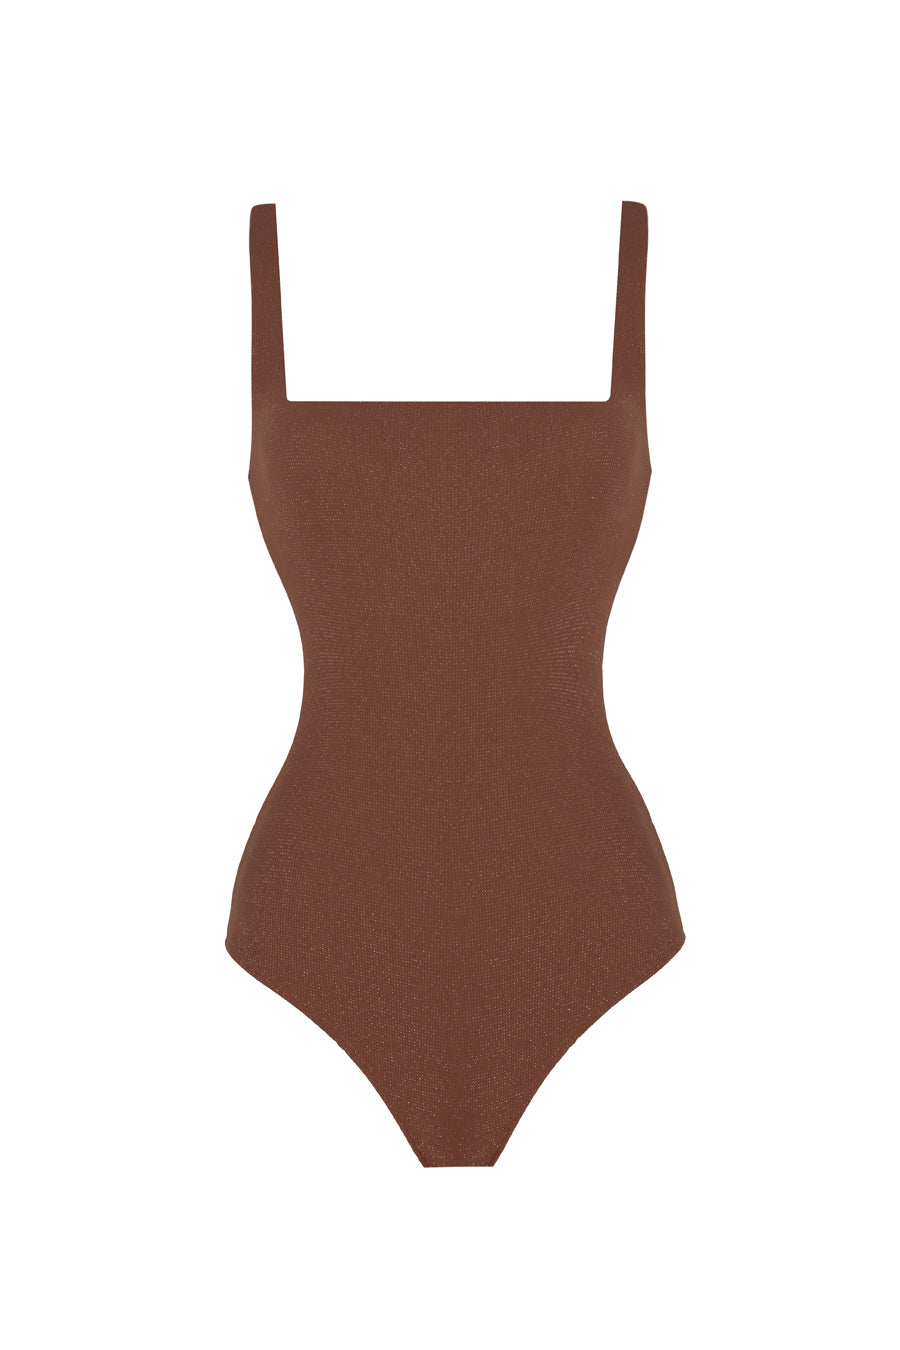 Mirabelle Brown-Gold Textured Swimsuit